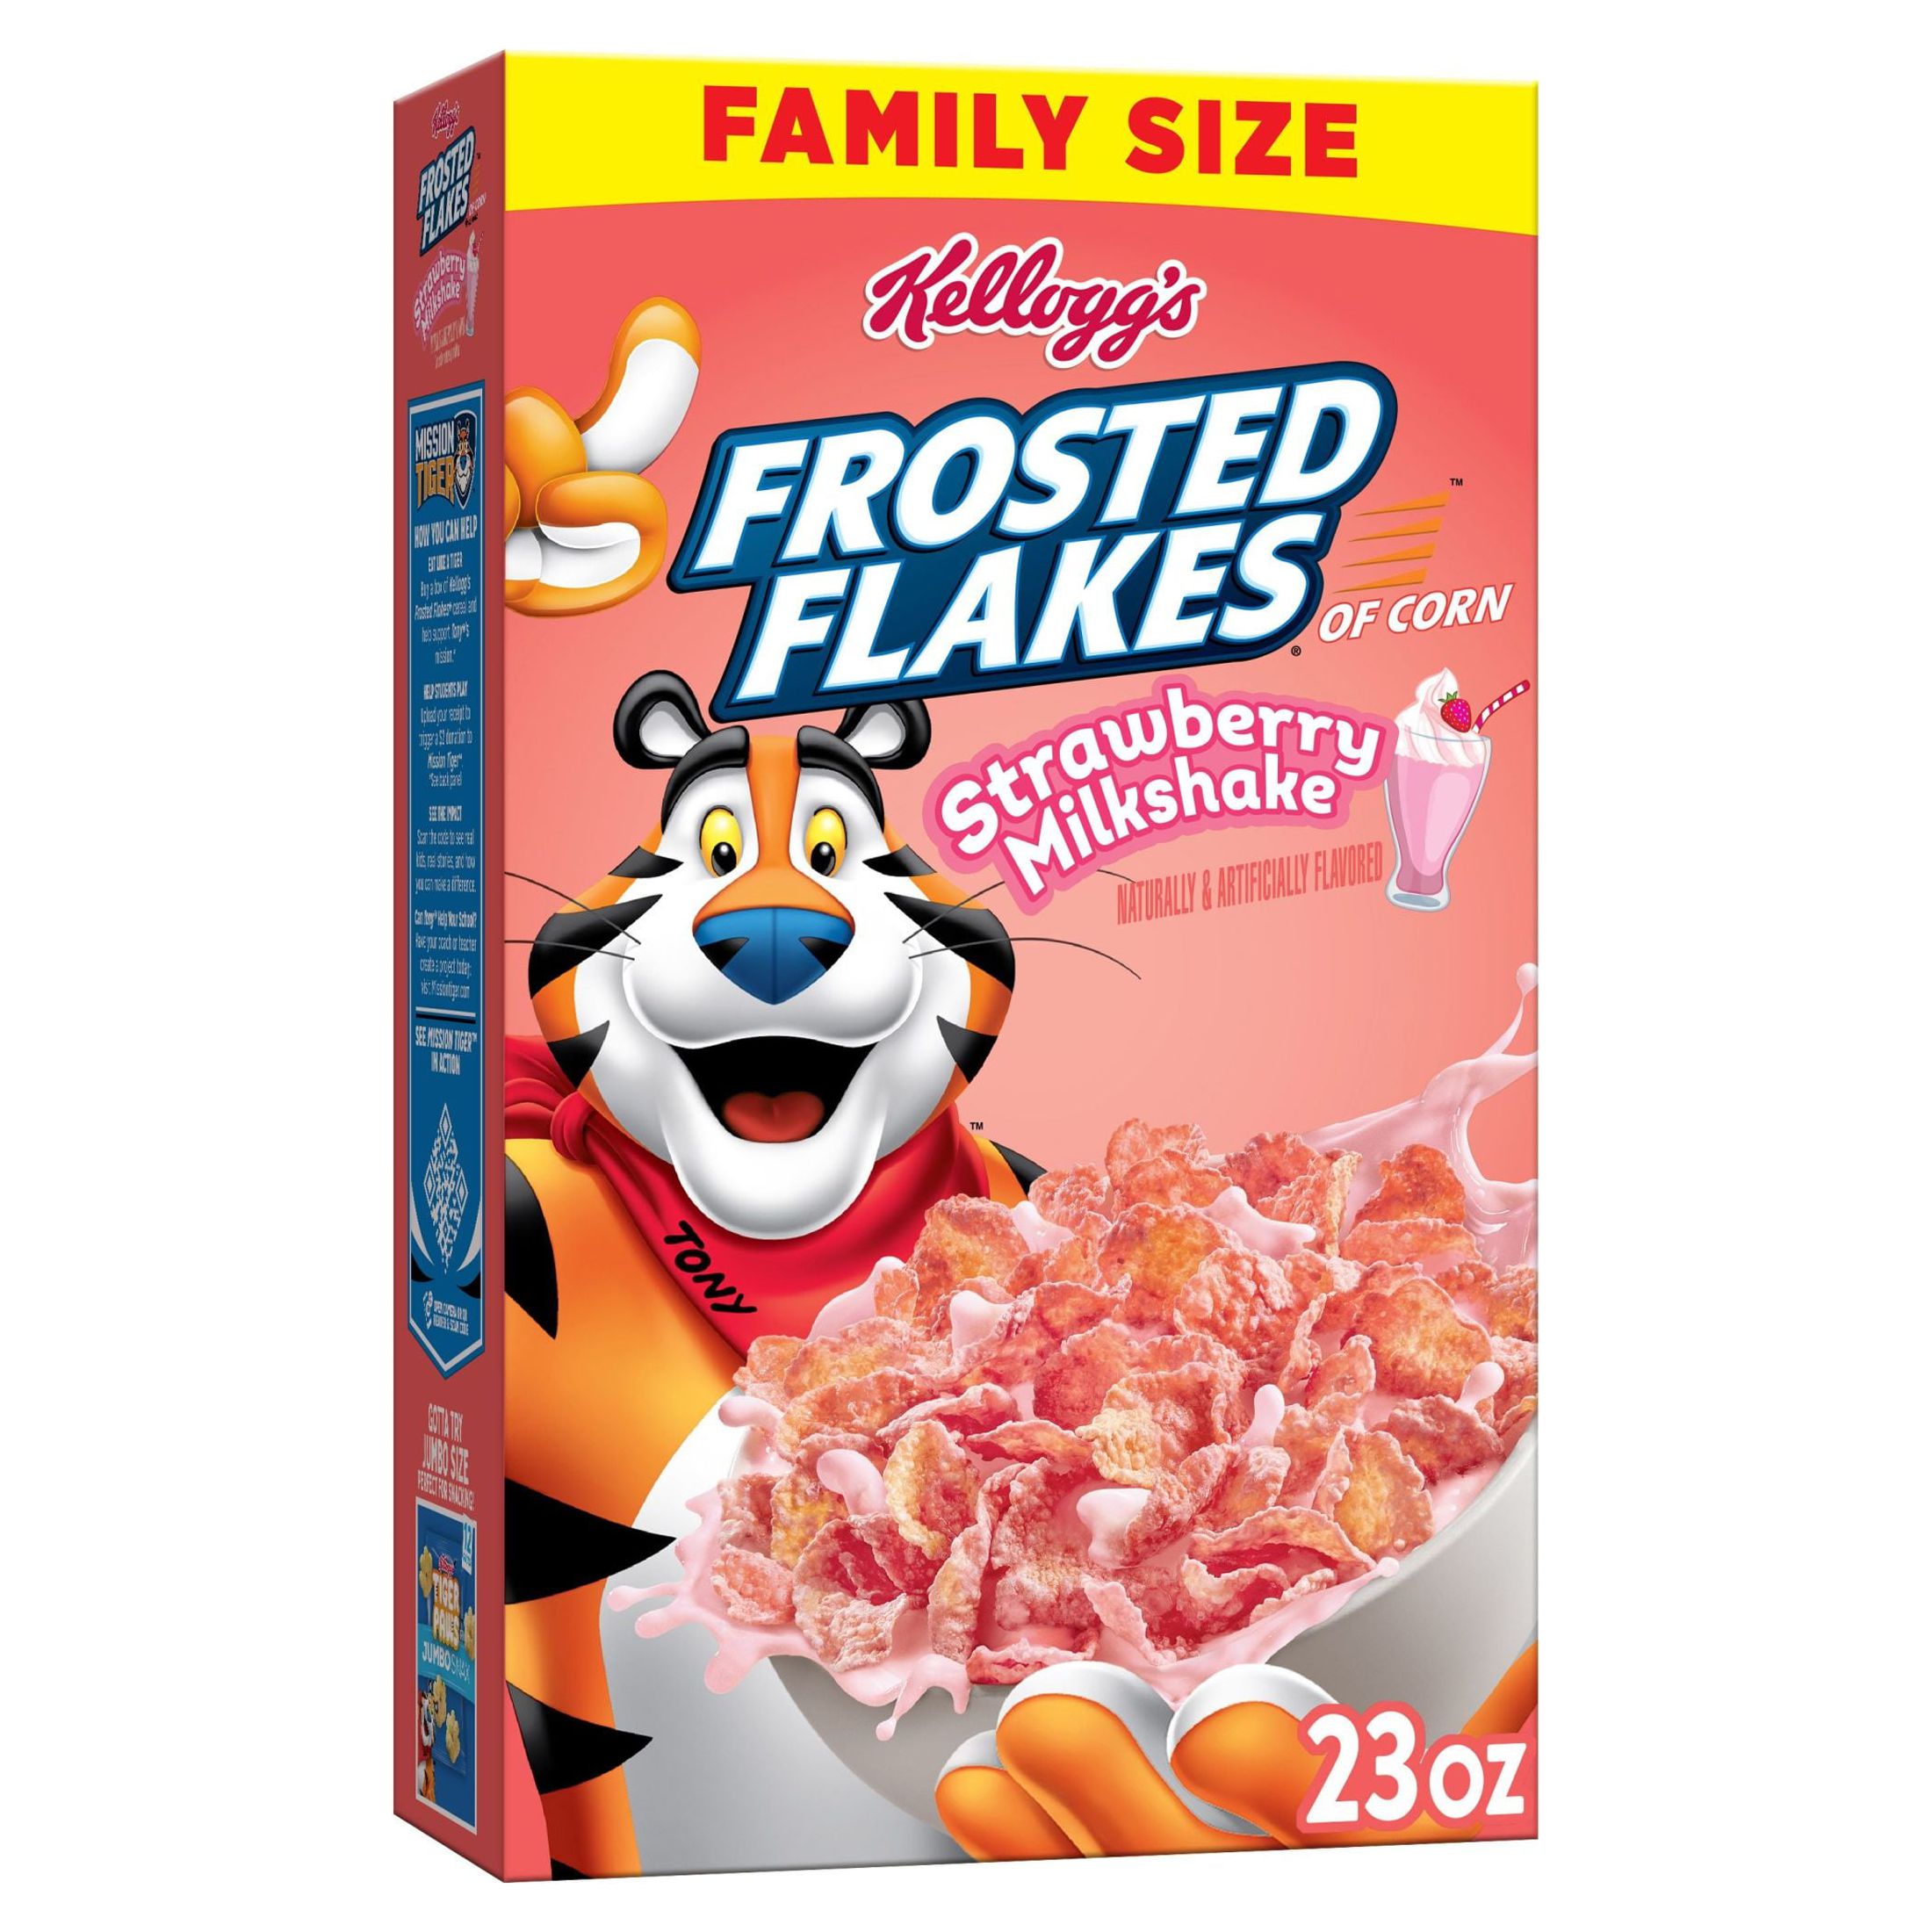 Kellogg's Frosted Flakes Strawberry Milkshake Cold Breakfast Cereal, Family Size, 23 oz Box - image 1 of 13